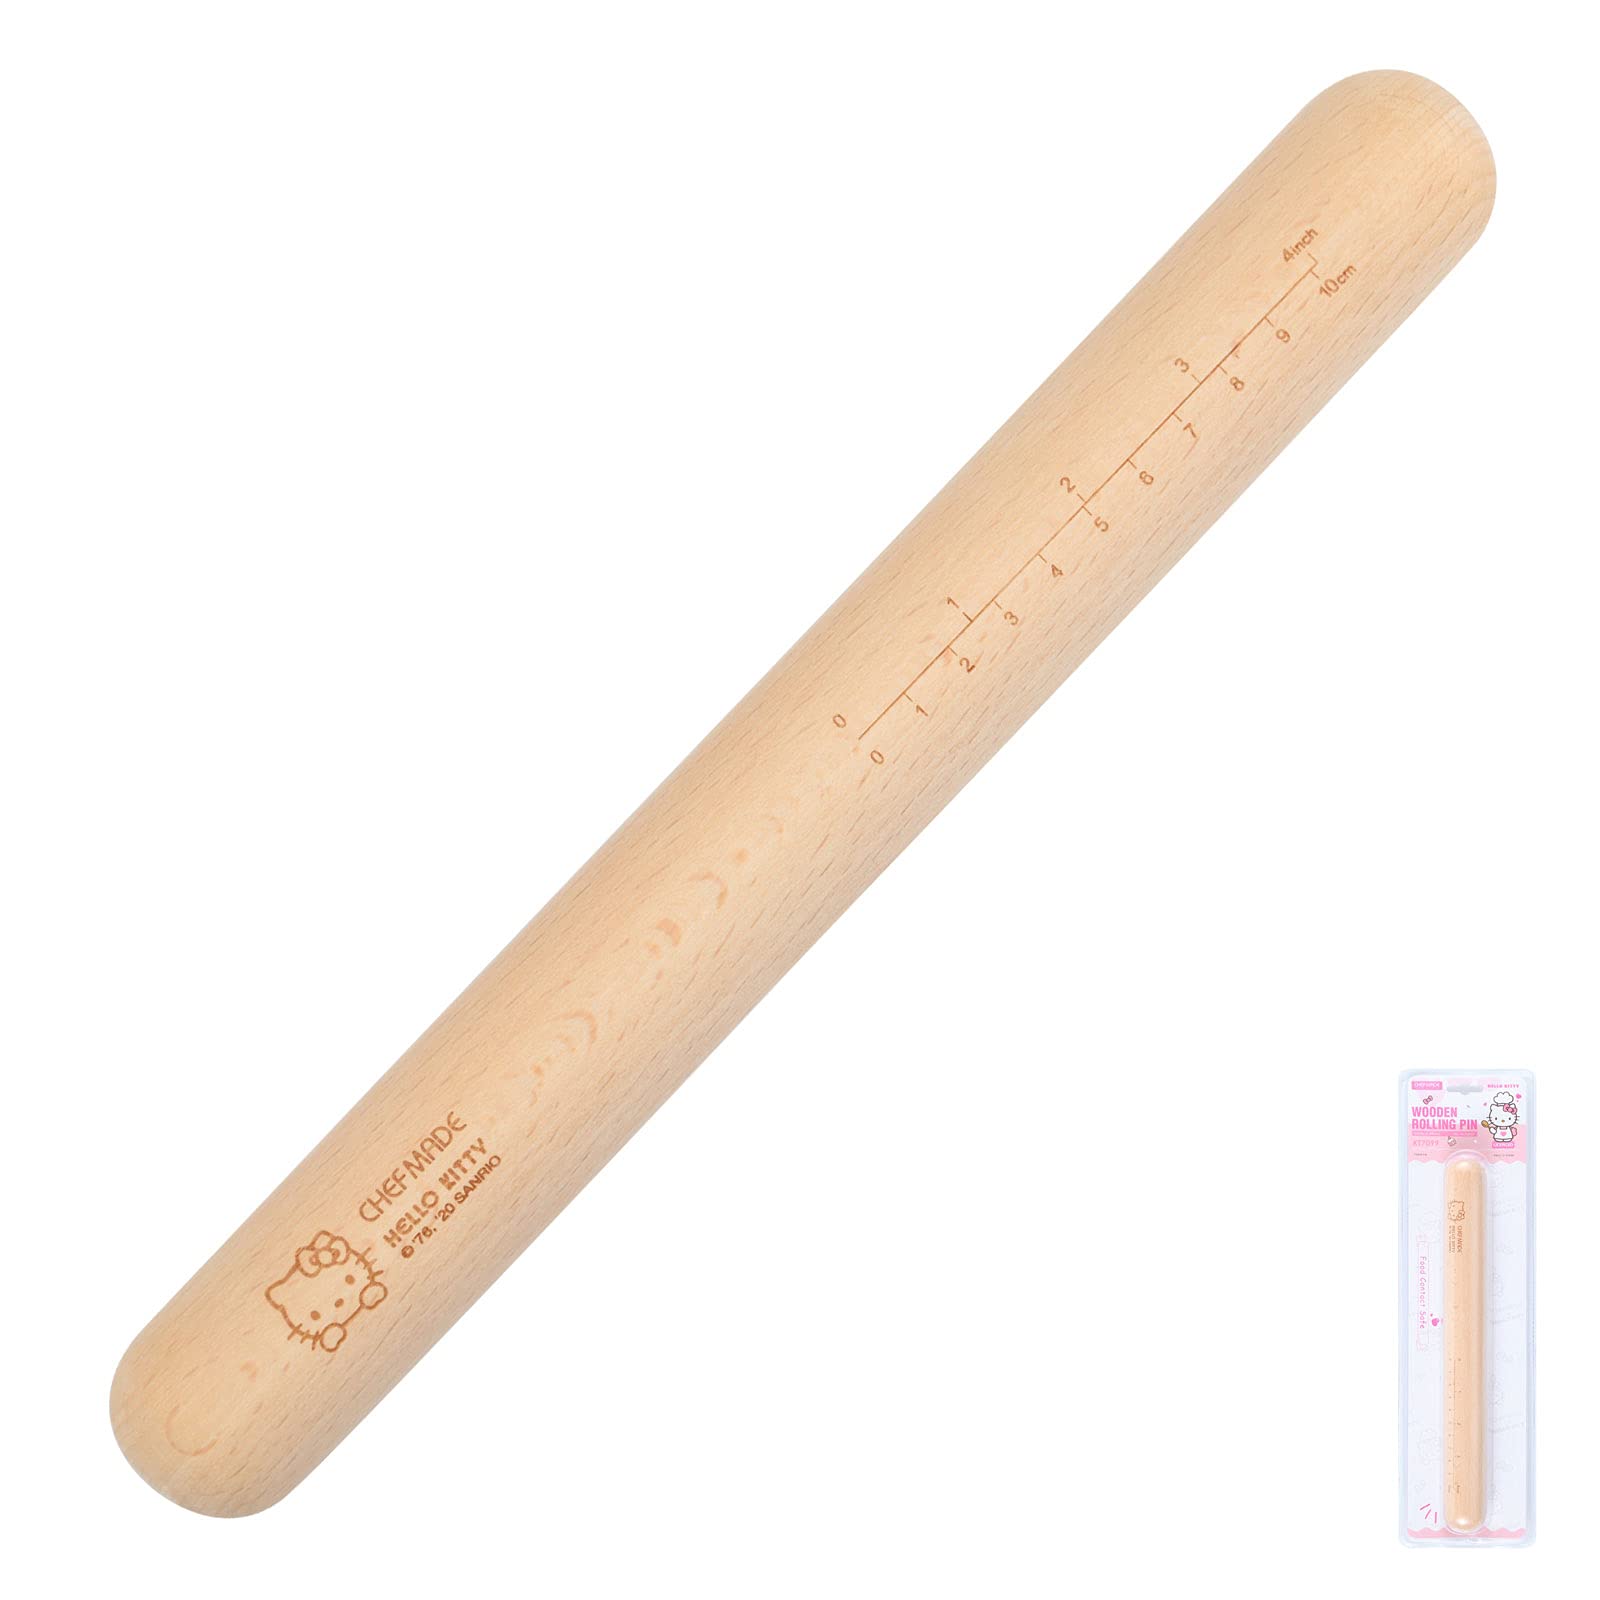 Chefmade學廚KT7099多用途桿麵棍30cm 11.8" Hello Kitty Wooden Rolling Pin